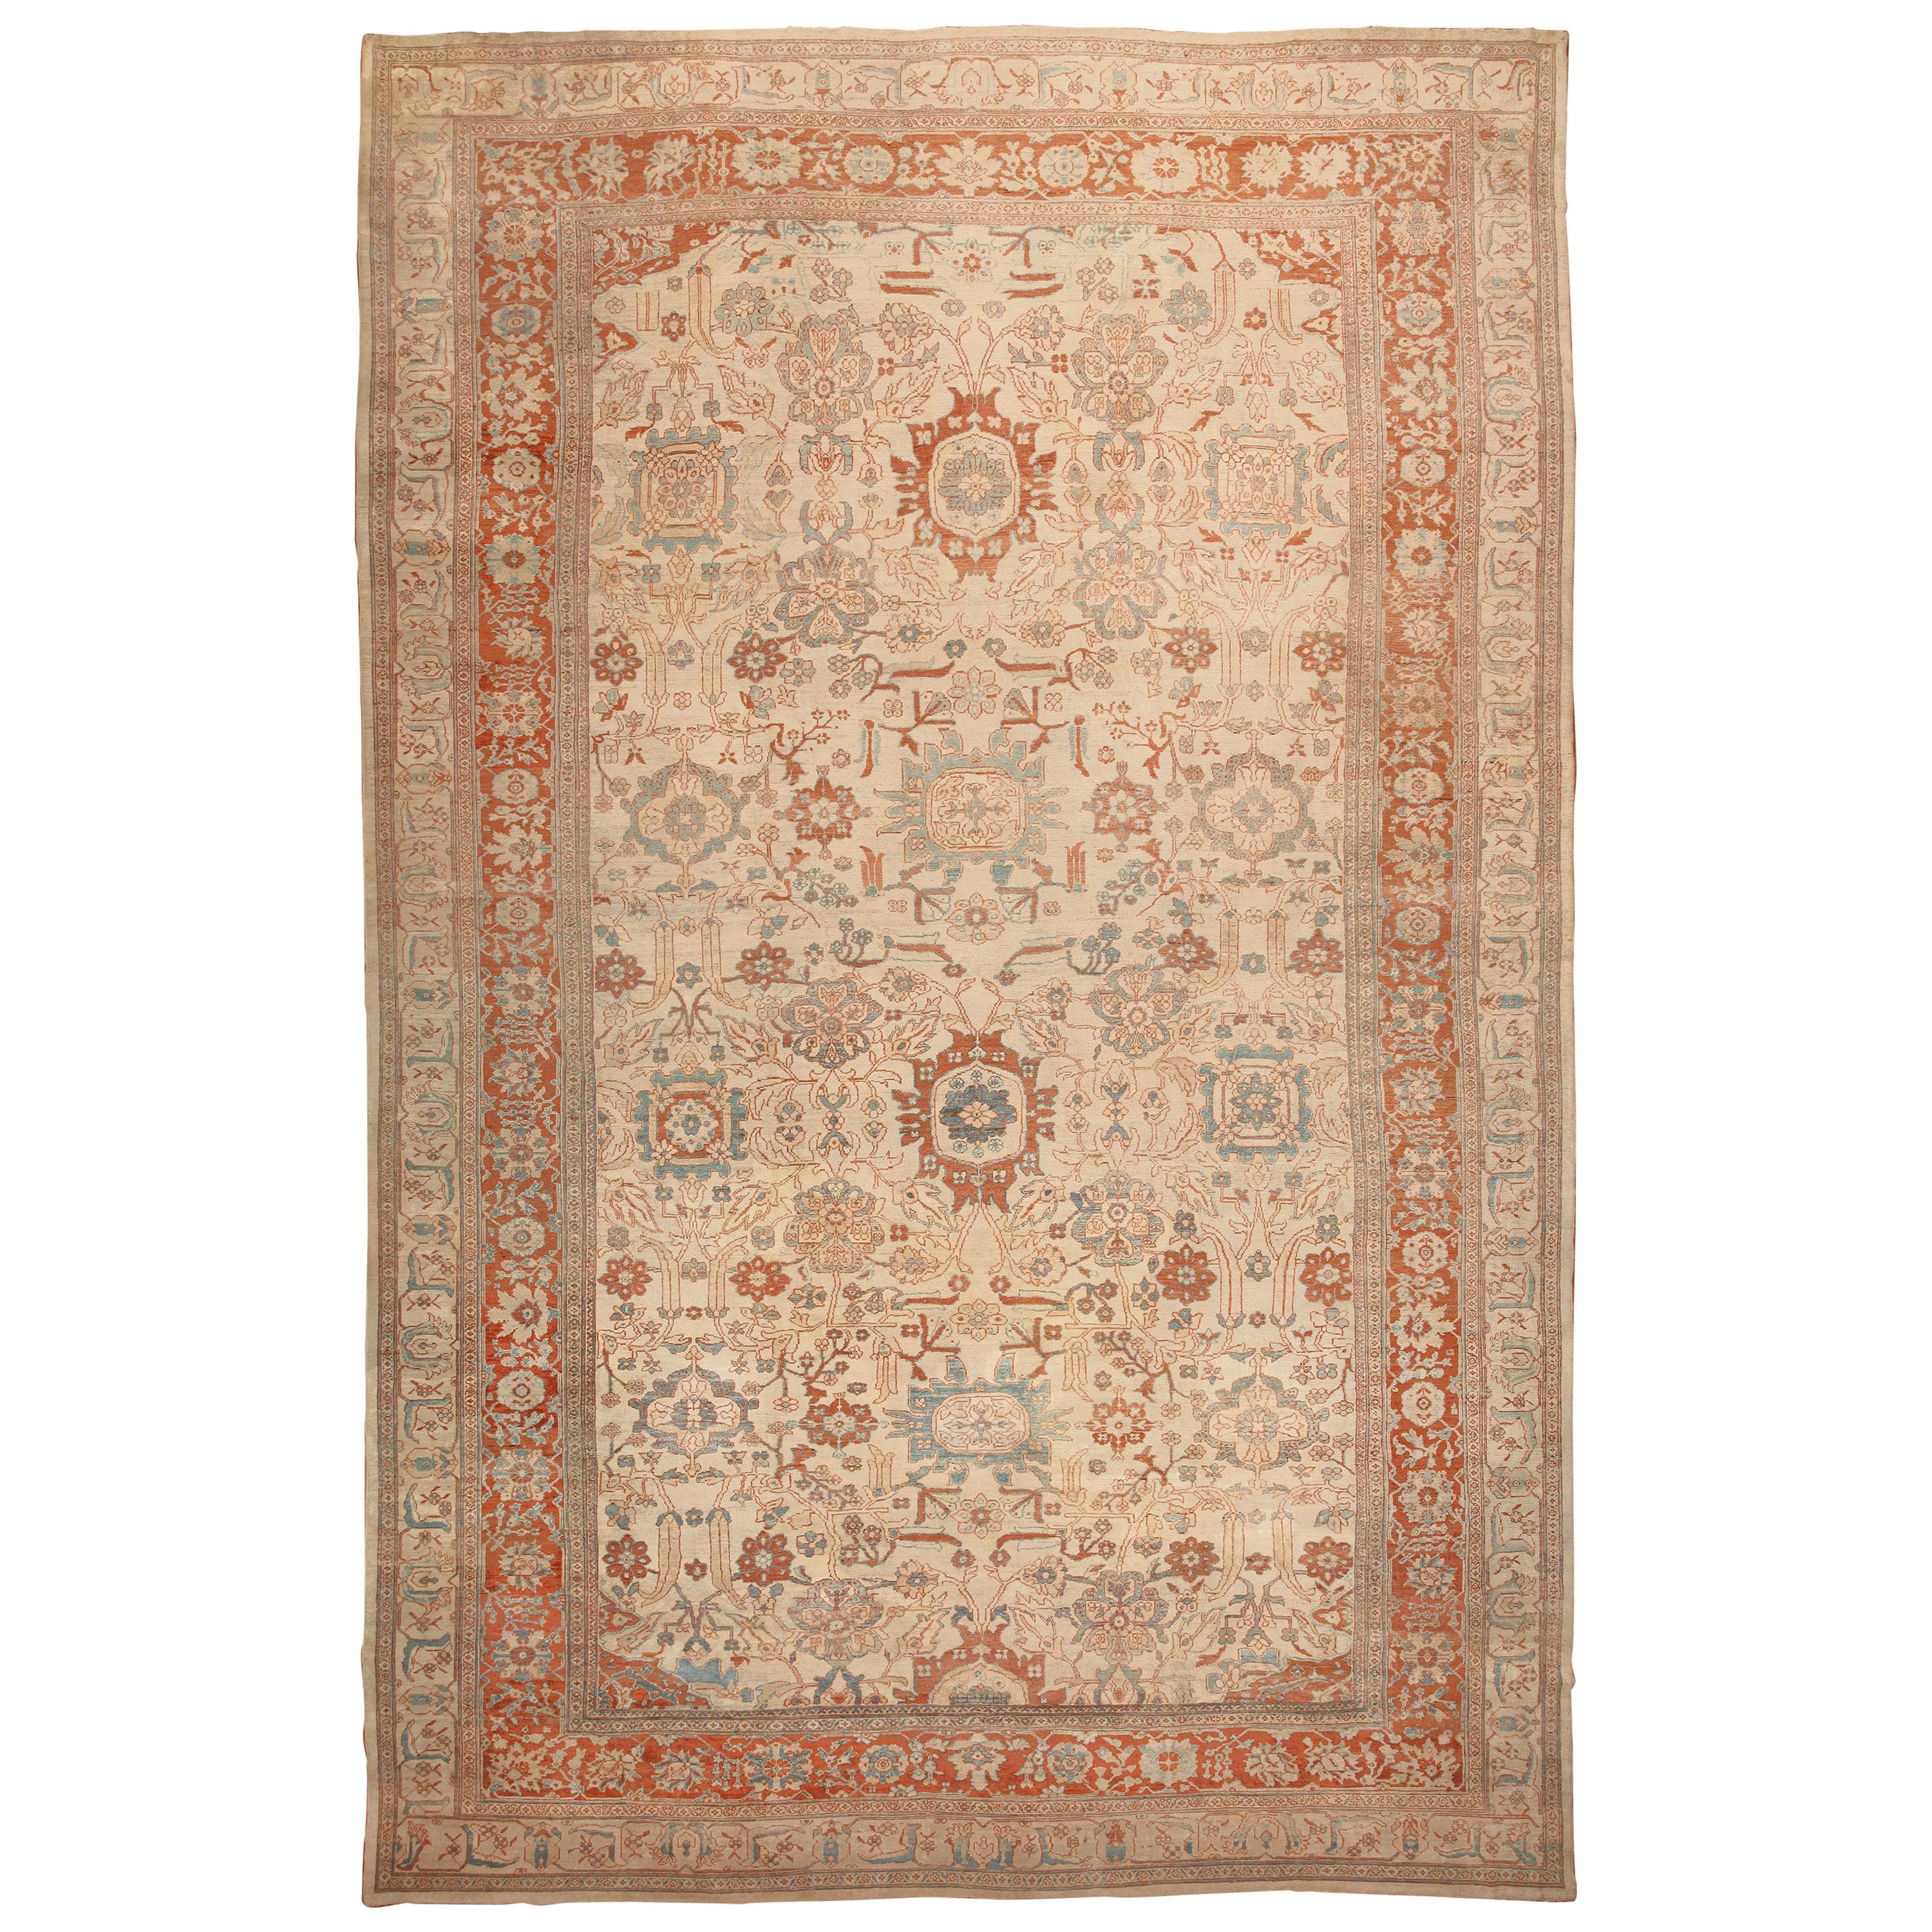 Nazmiyal Antique Ziegler Sultanabad Carpet. Size: 14 ft 5 in x 22 ft 3 in